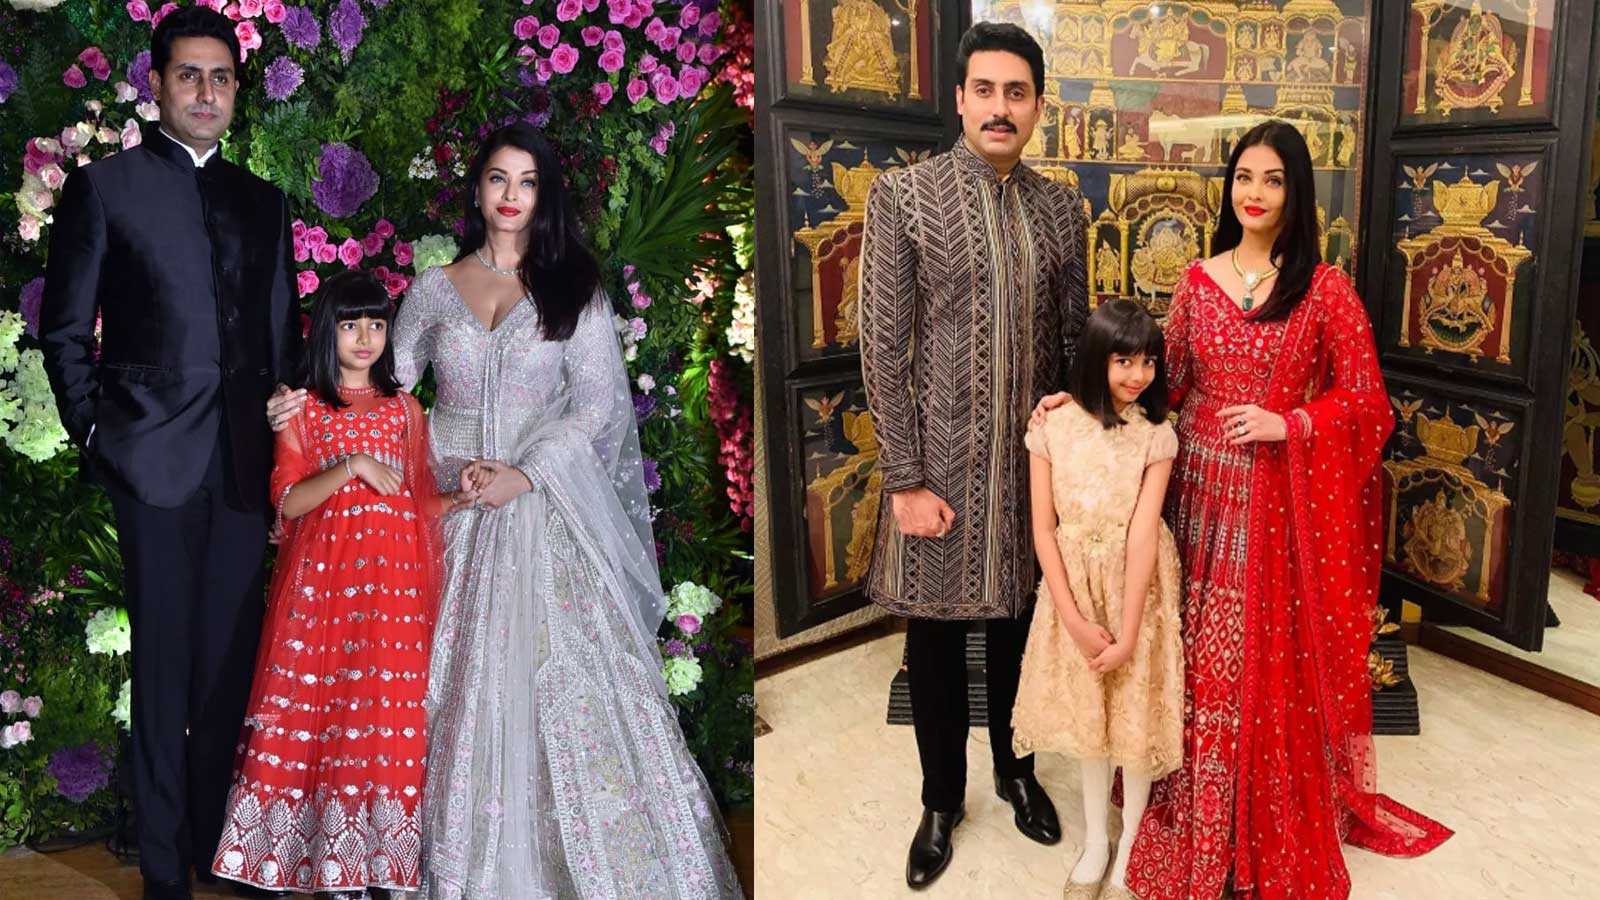 Like mother, like daughter: Aaradhya Bachchan's red look reminds us of Aishwarya Rai Bachchan's this look